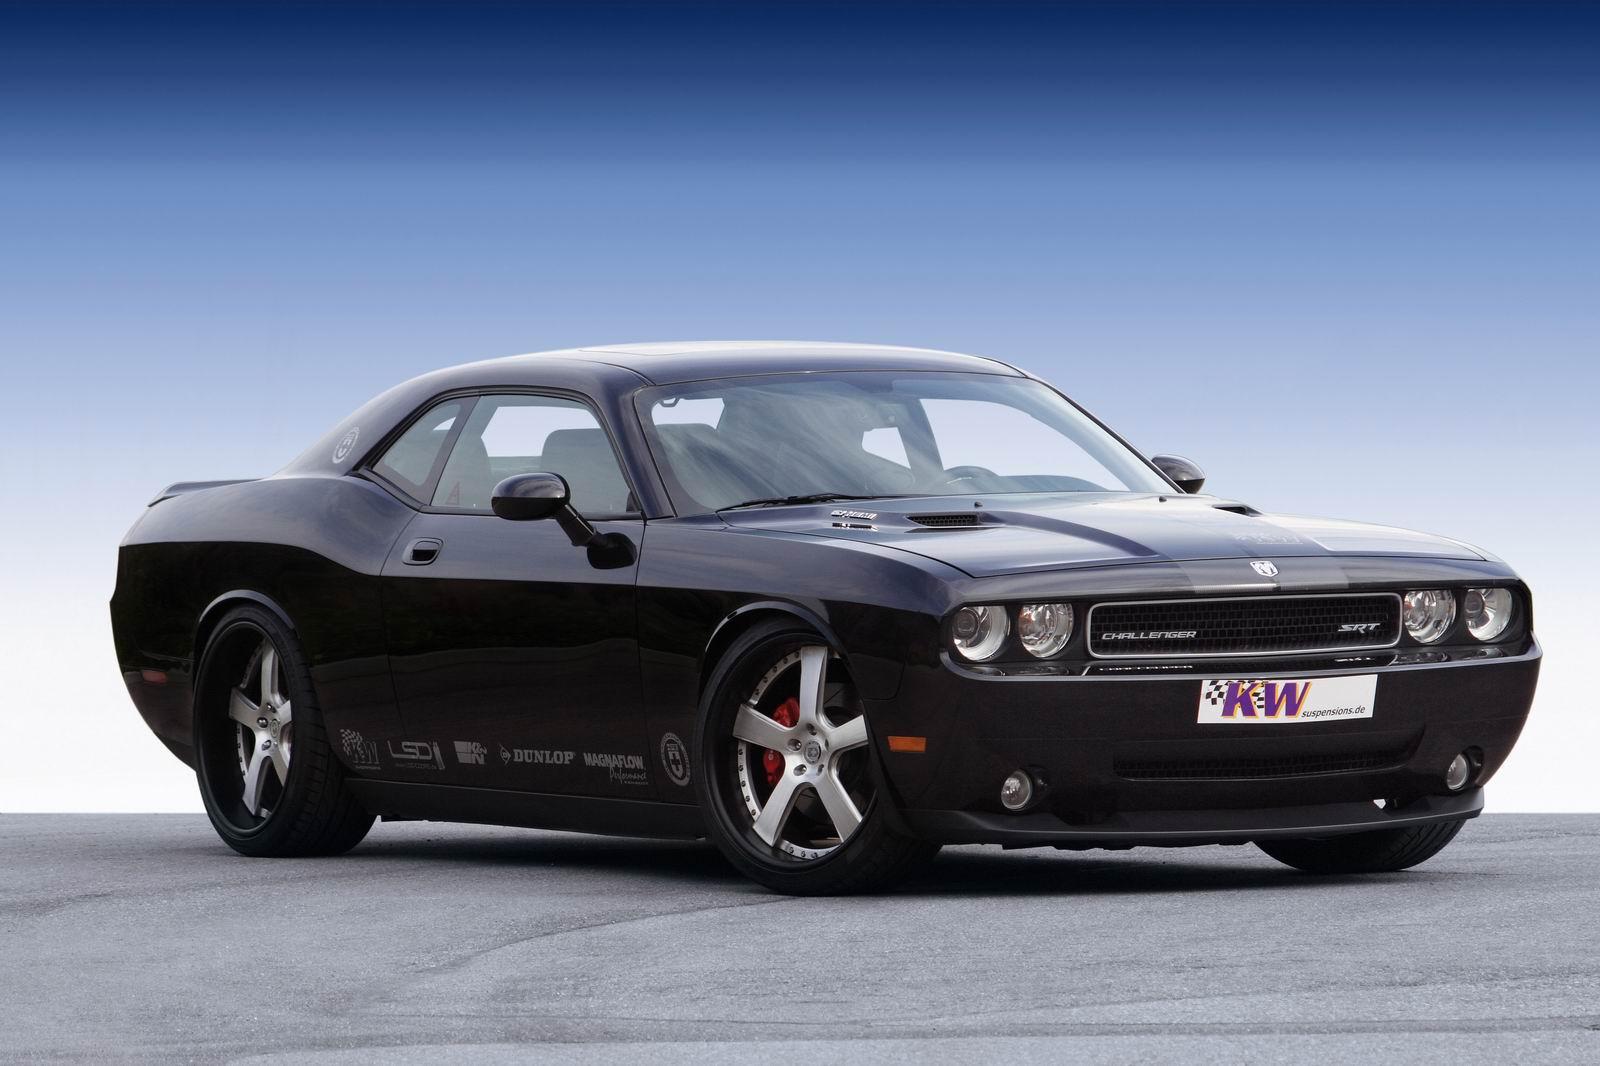 Dodge Challenger Srt8 By Kw Car Tuning And Modified Cars Hd Wallpapers